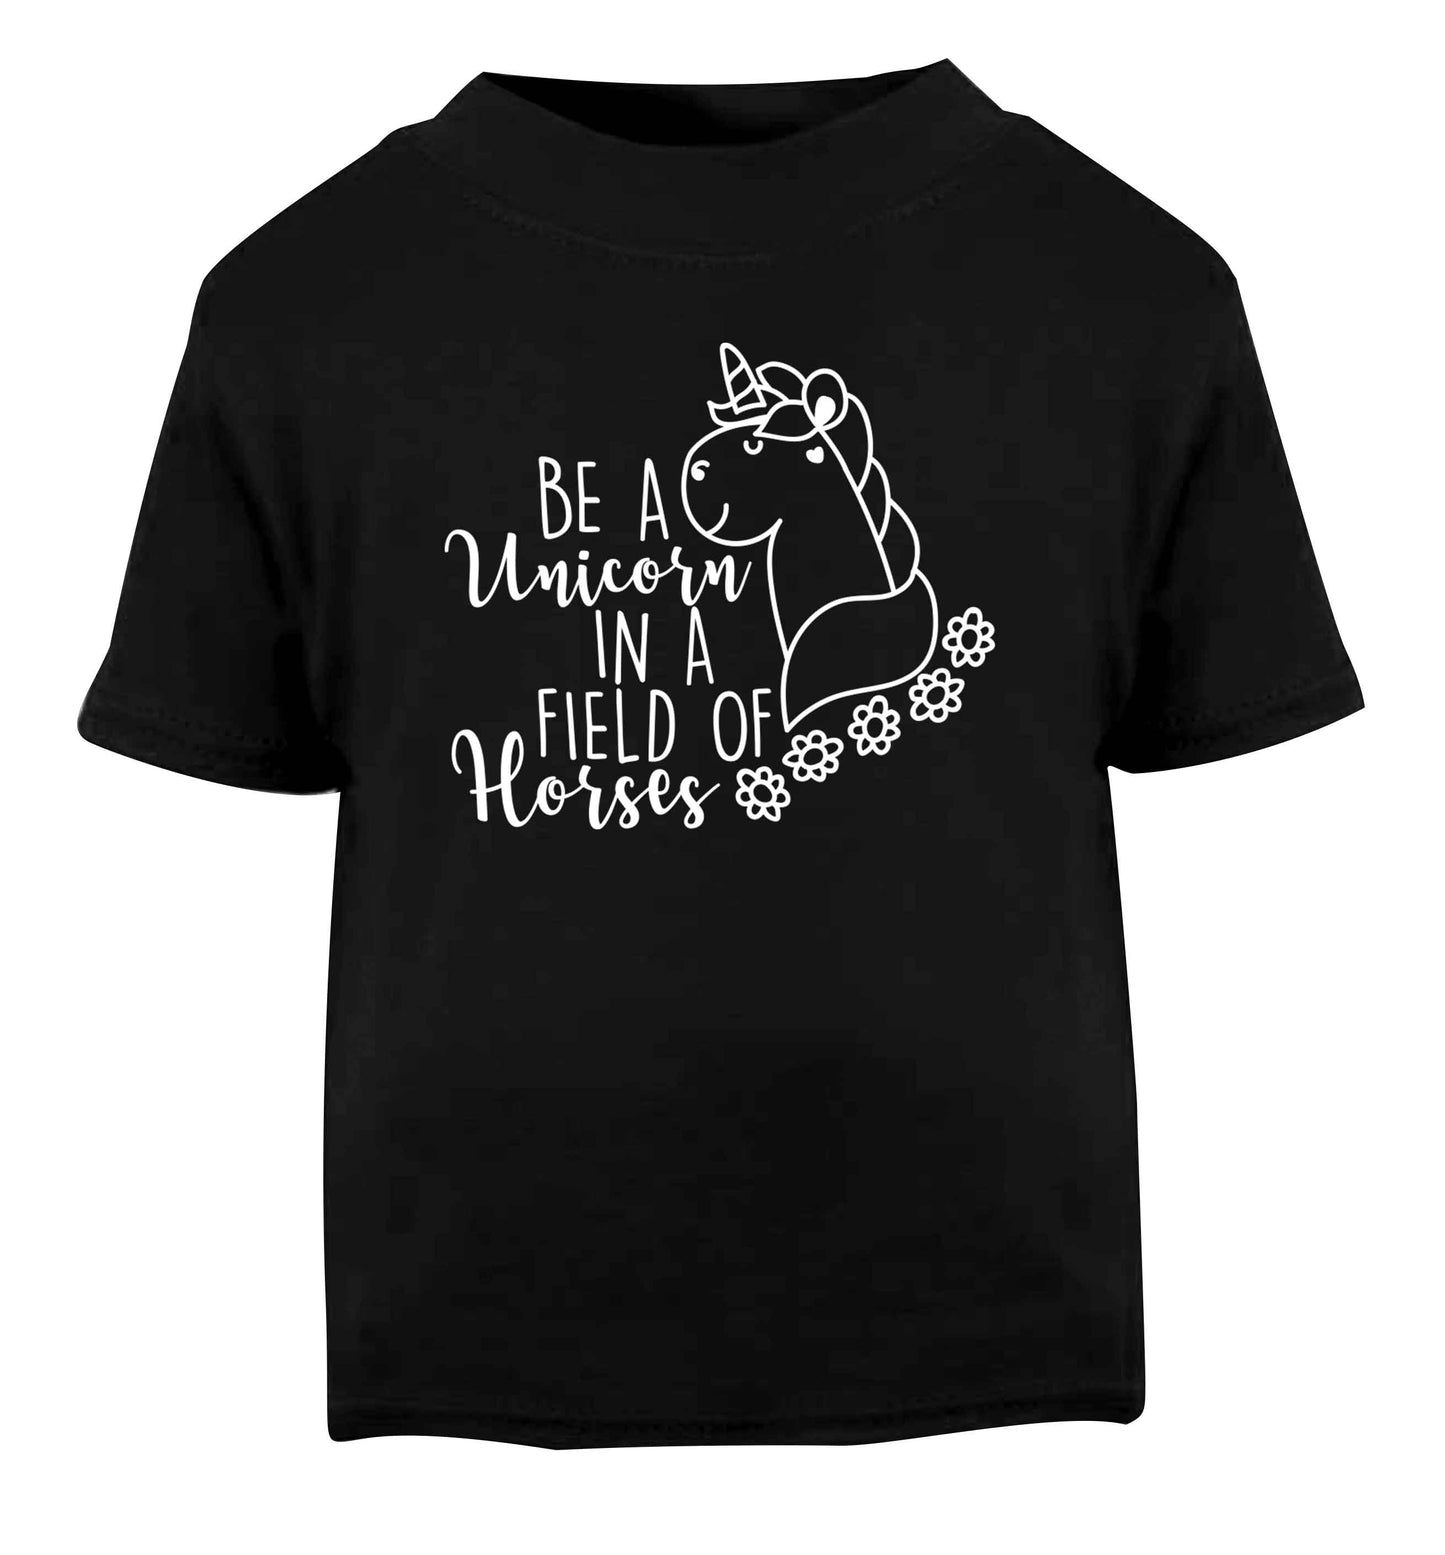 Be a unicorn in a field of horses Black Baby Toddler Tshirt 2 years